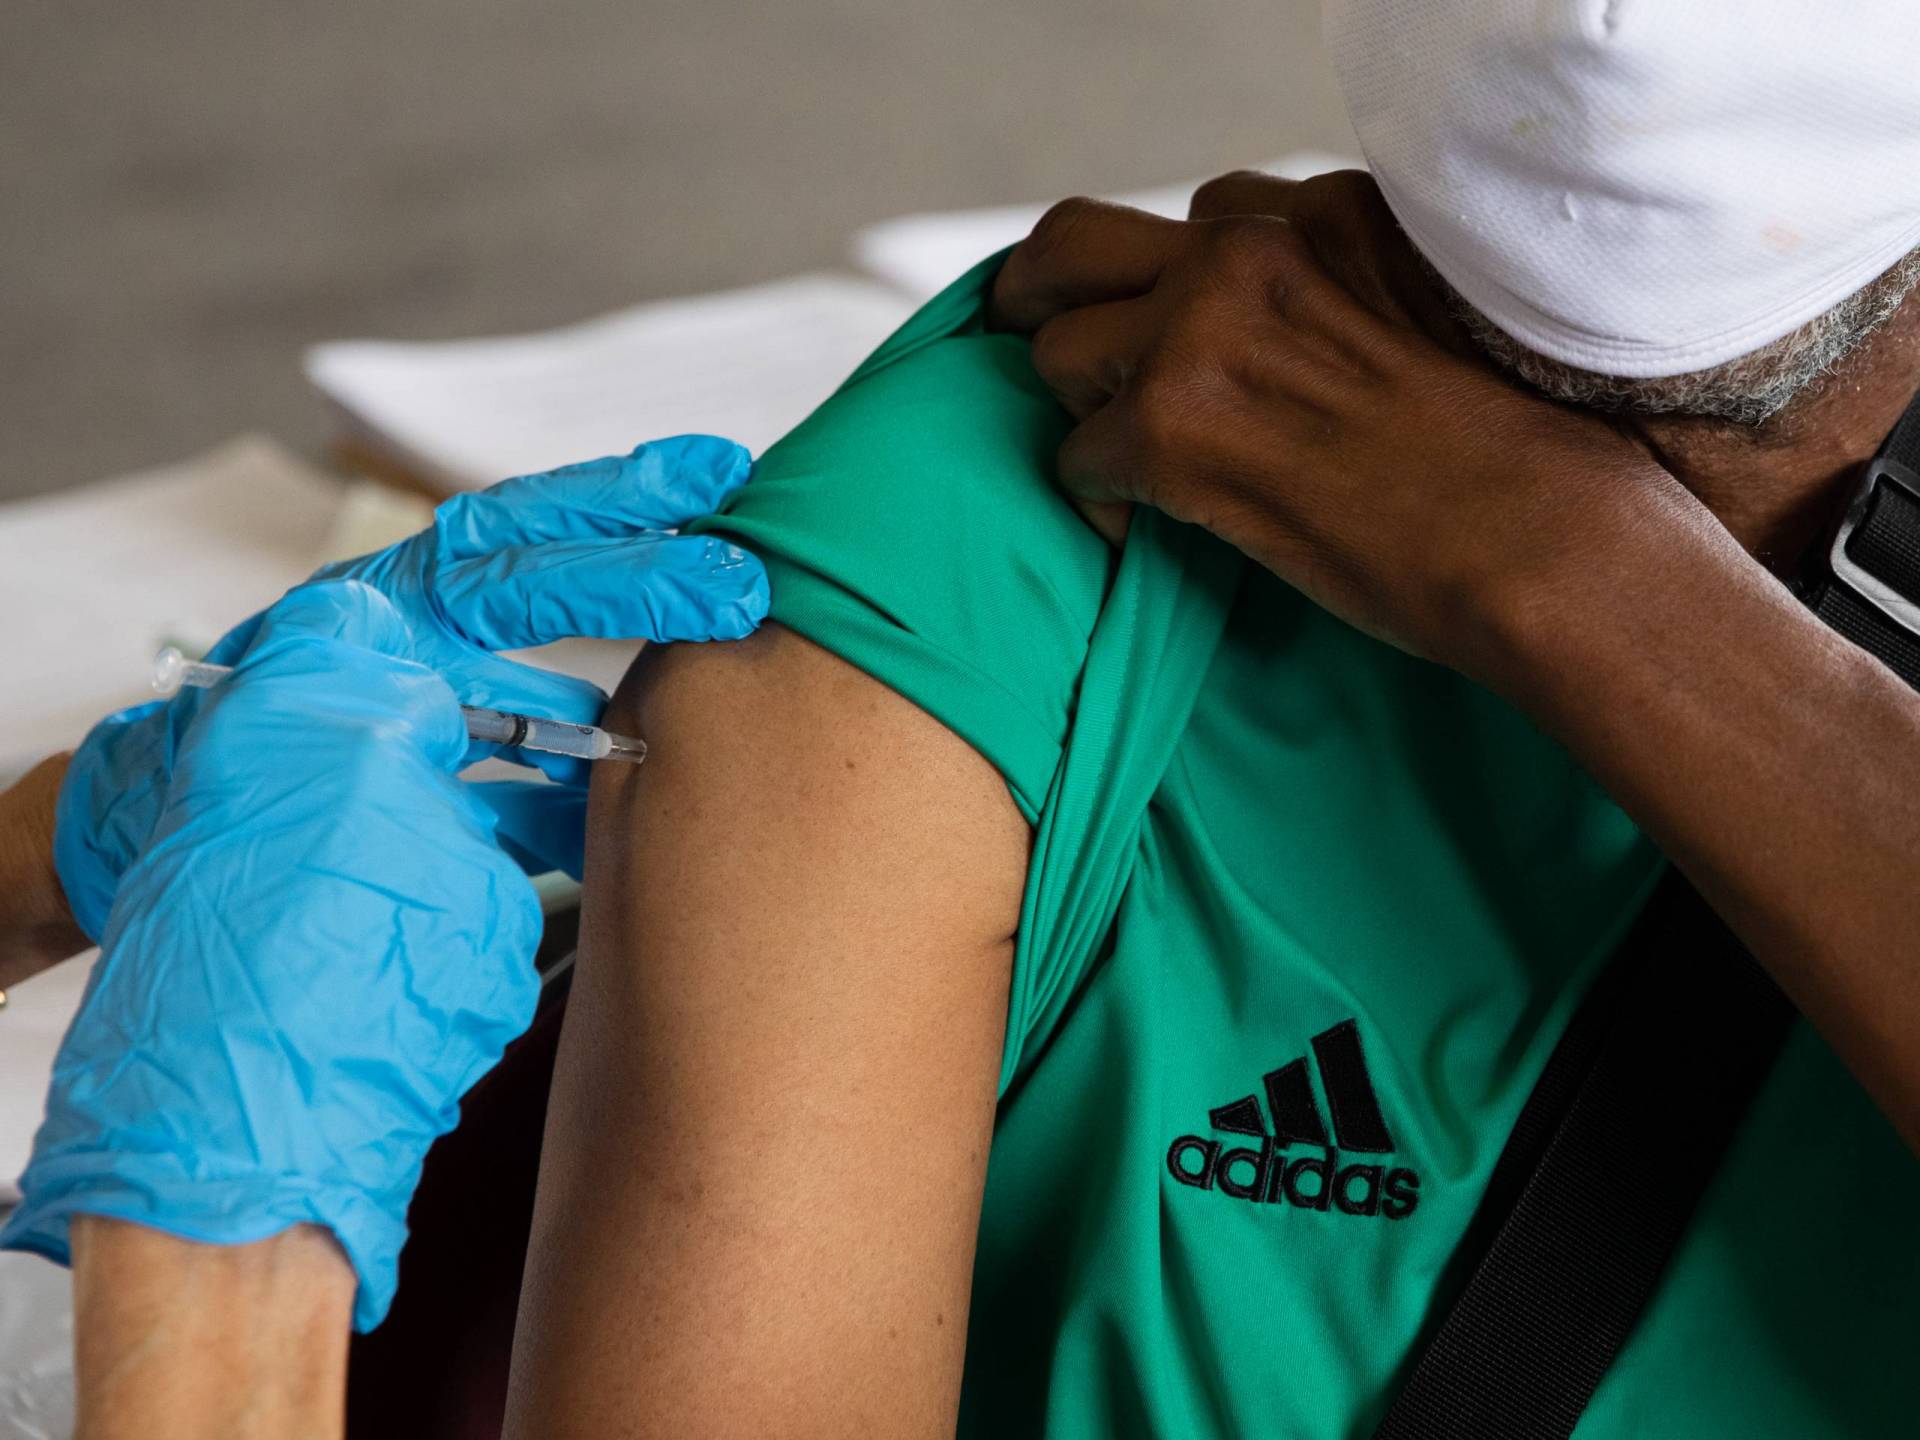 Blue-gloved hands administer a vaccine into a shoulder.